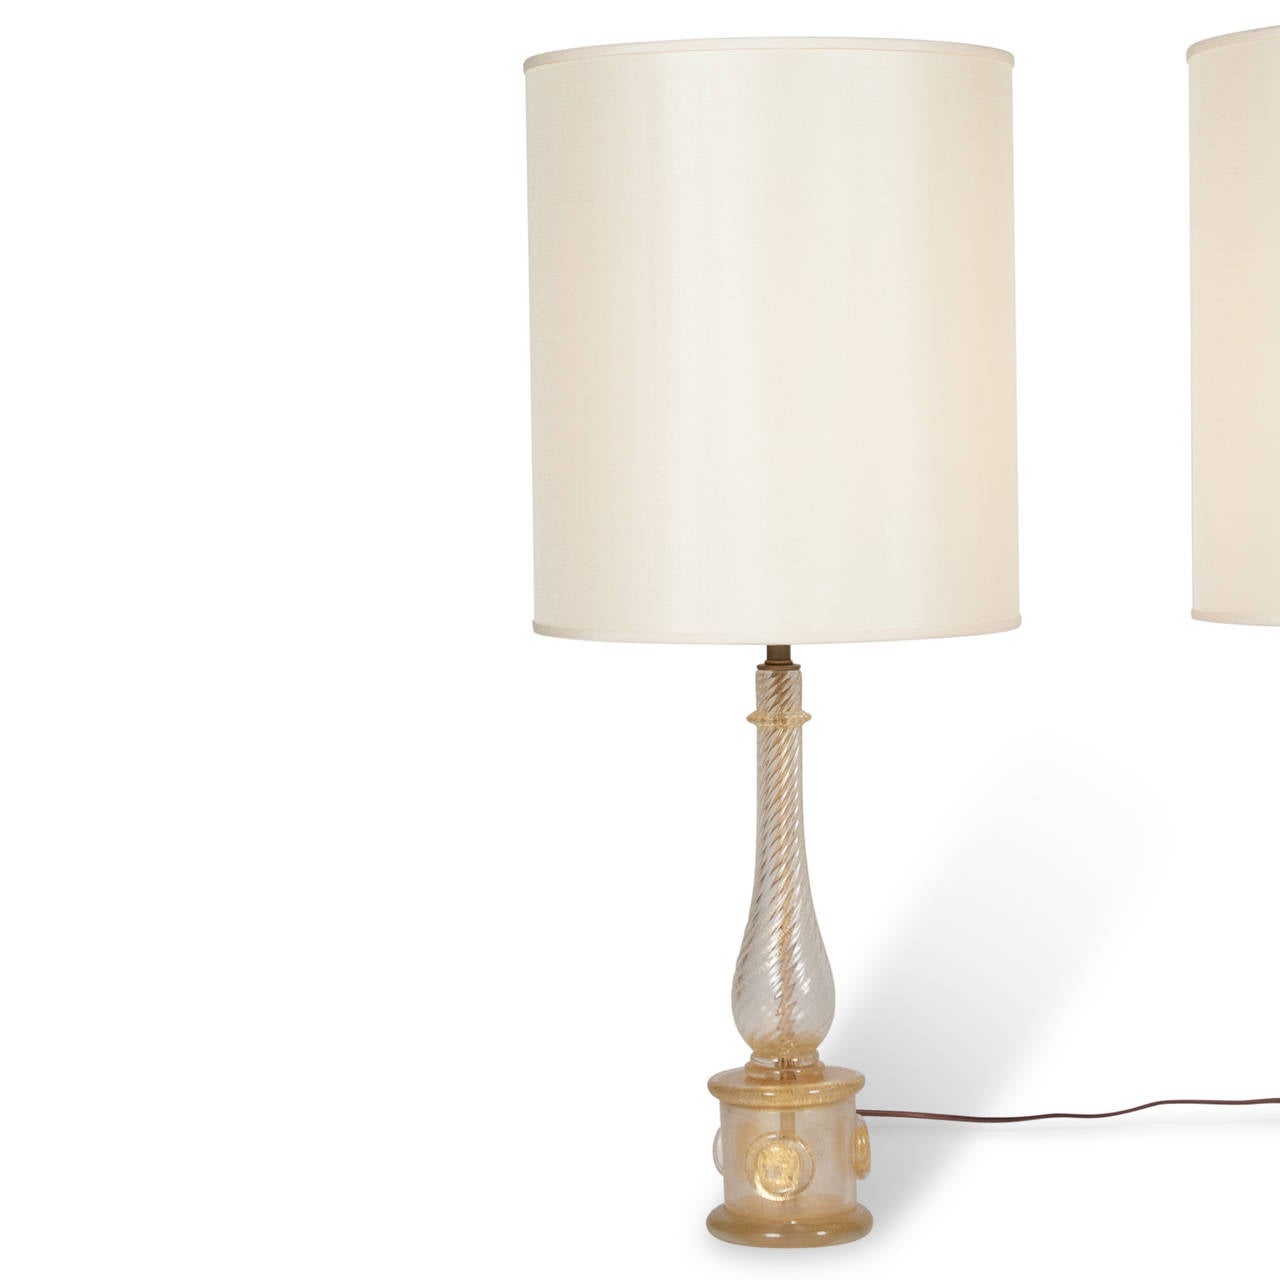 Pair of glass column lamps with applied discs at base, the glass clear, spiraled, and with gold inclusions, by Barovier e Toso, Italian, 1940s. Measures: 4 1/8” D base 14.5” D shade at widest, 29.75” H. 
    
    